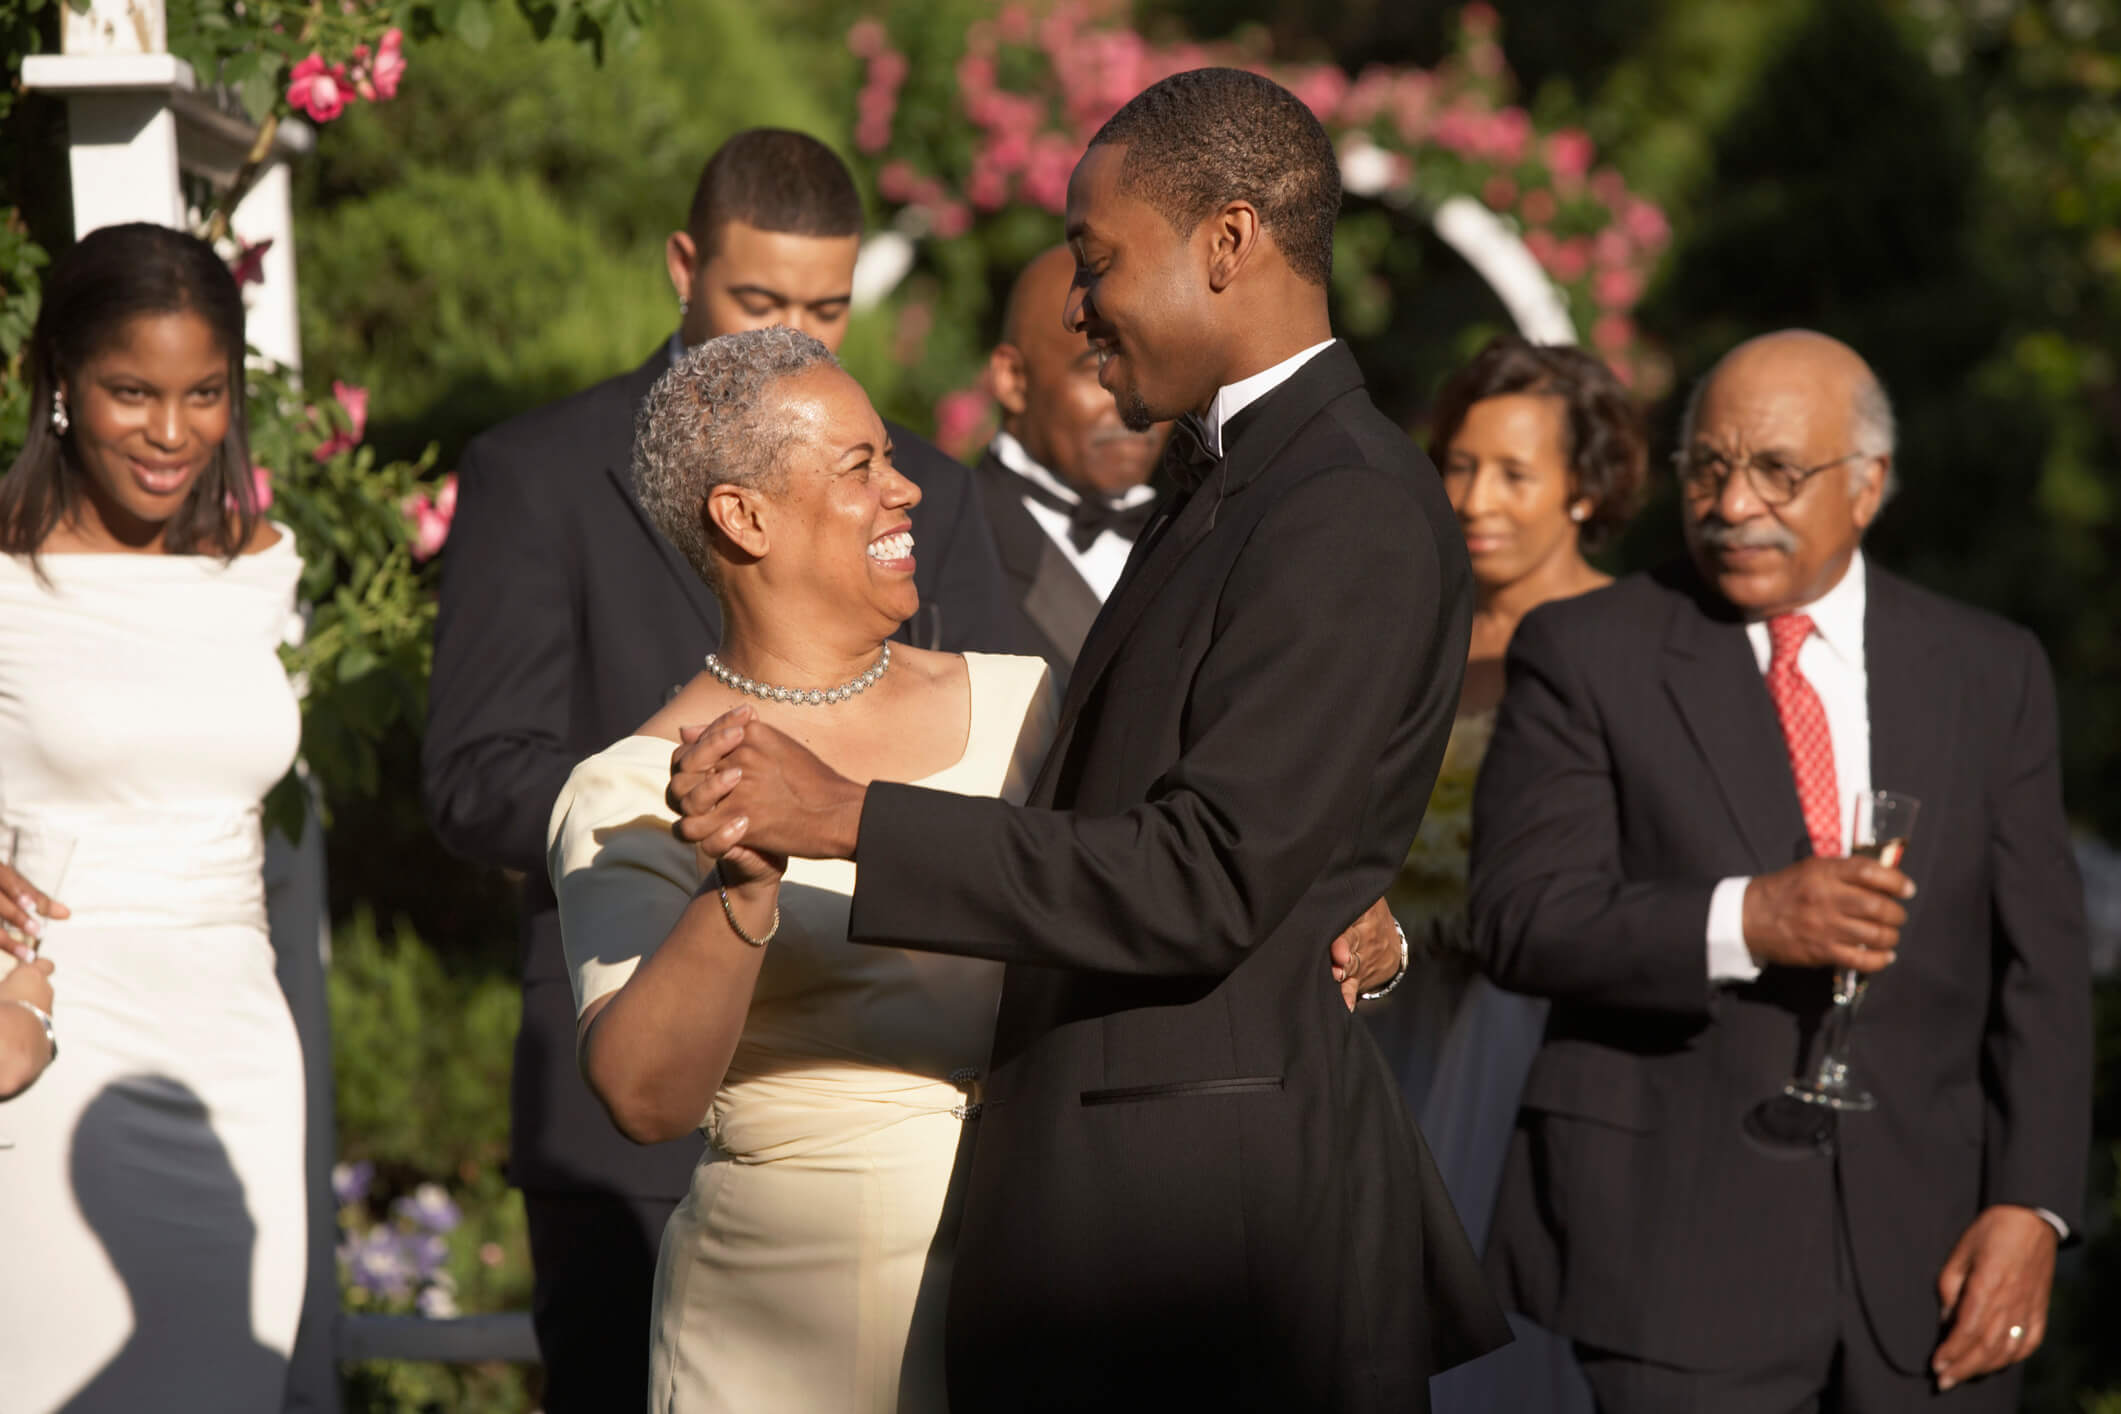 Mother-Son Dance Songs for Any Wedding Theme